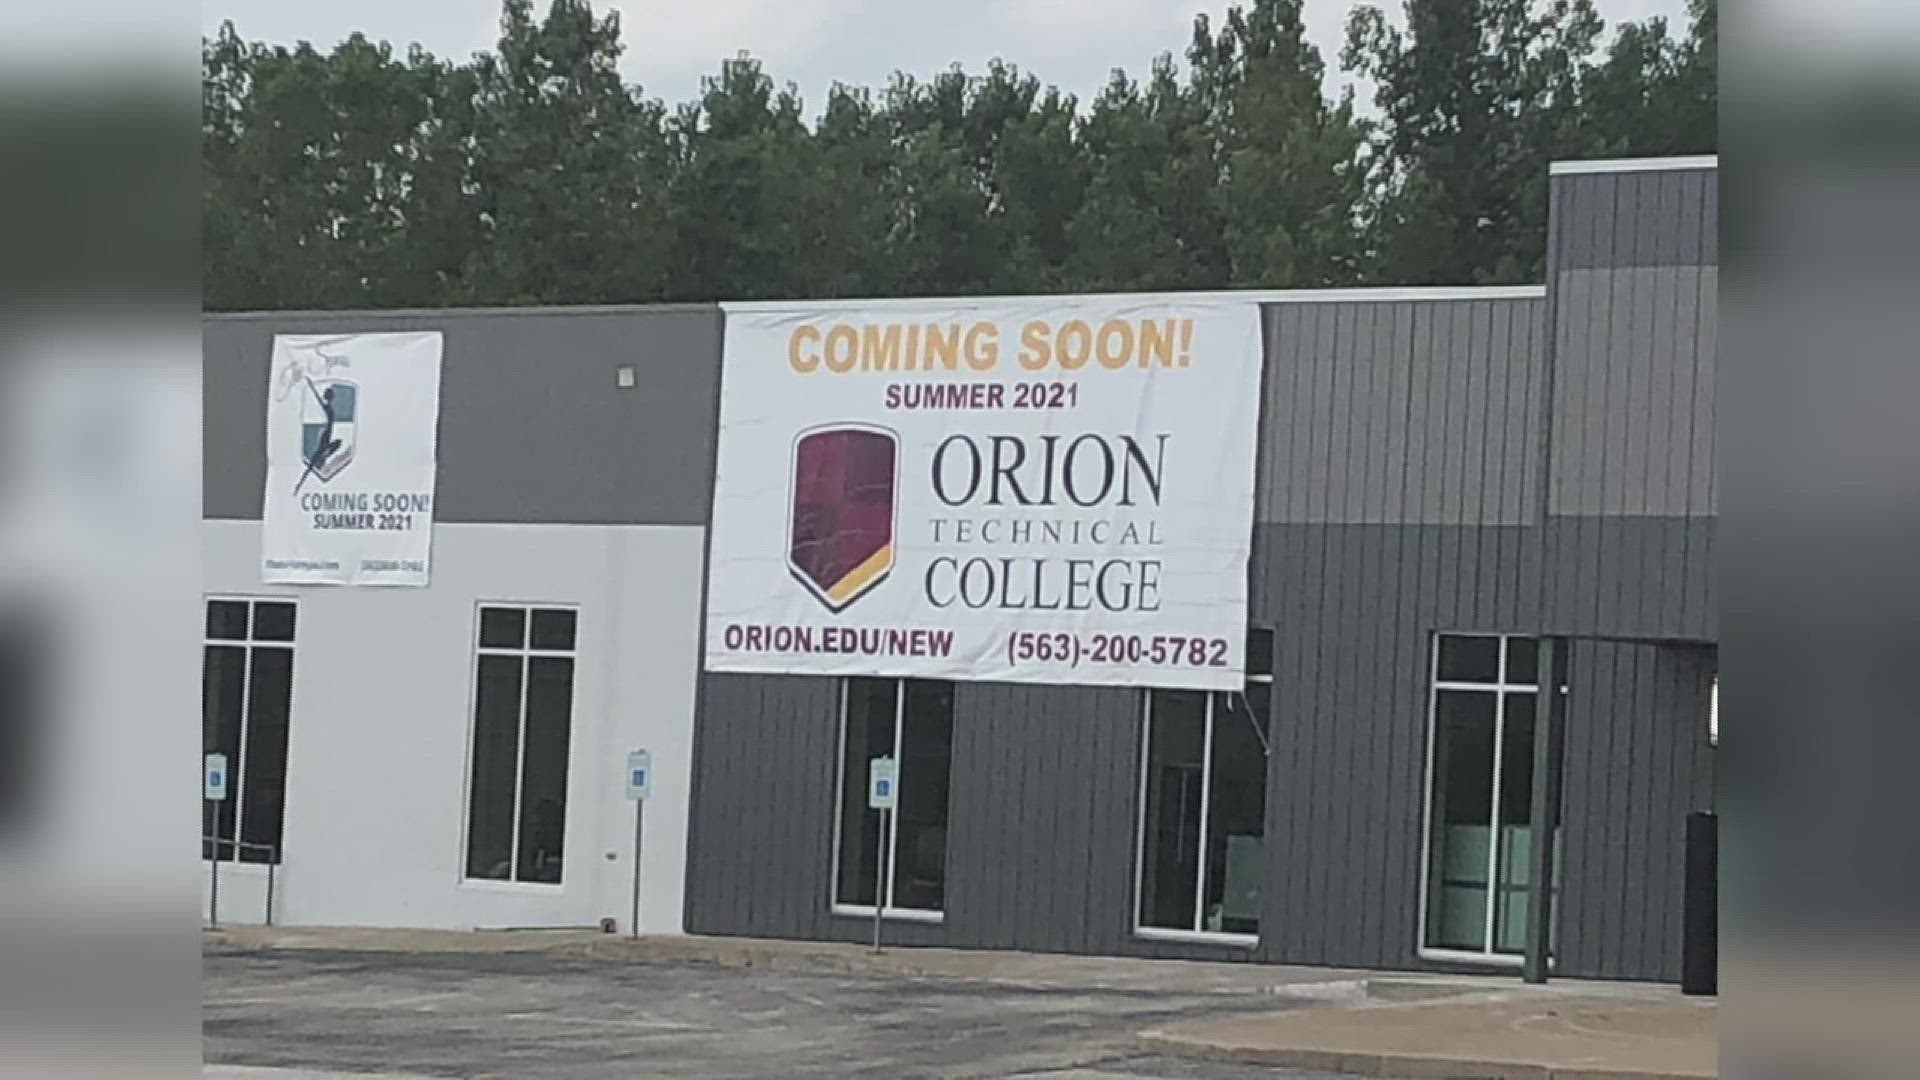 Orion Technical College, formerly Hamilton Tech, is moving into the old Gander Mountain on Elmore Avenue in Davenport